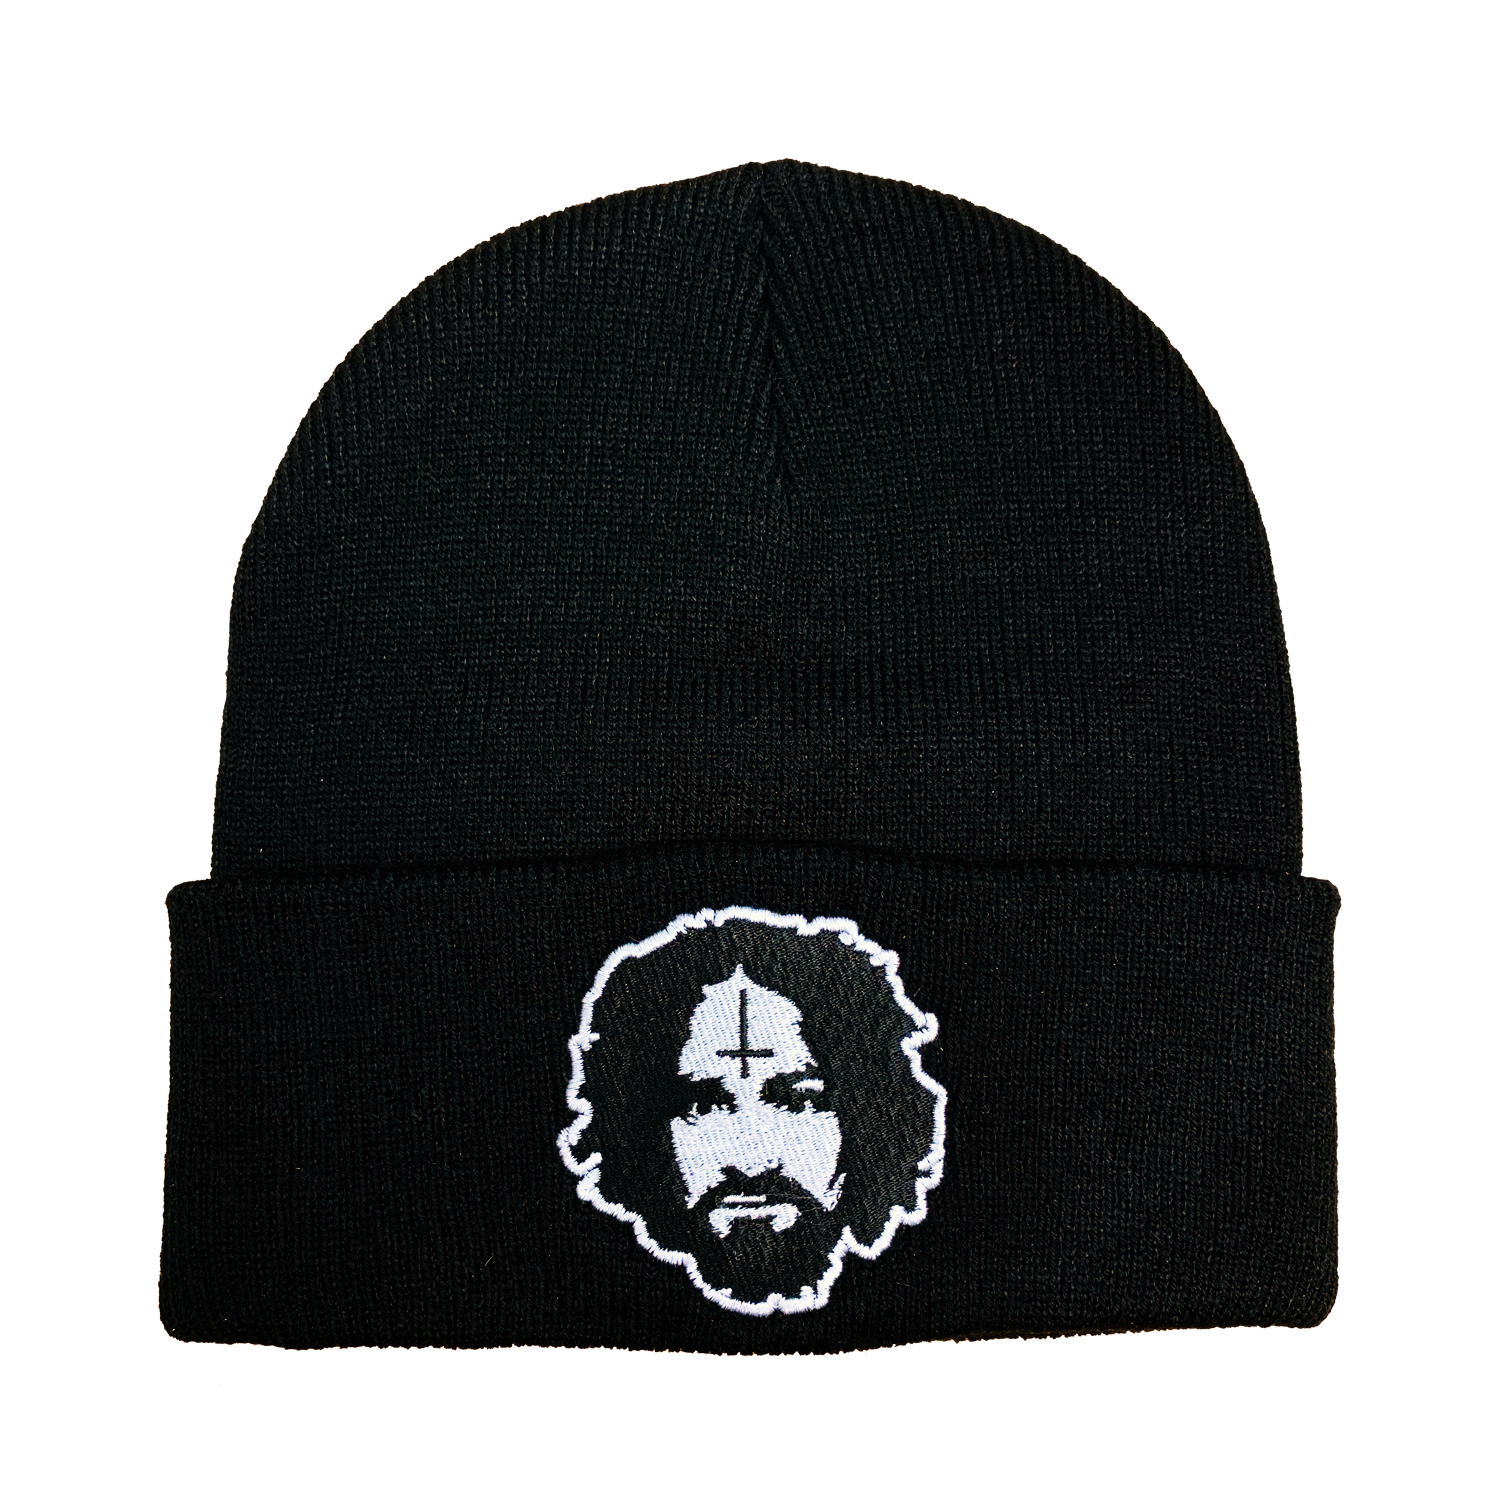 Charles Manson Embroidered Beanie - UNMASKED Horror & Punk Patches and Decor